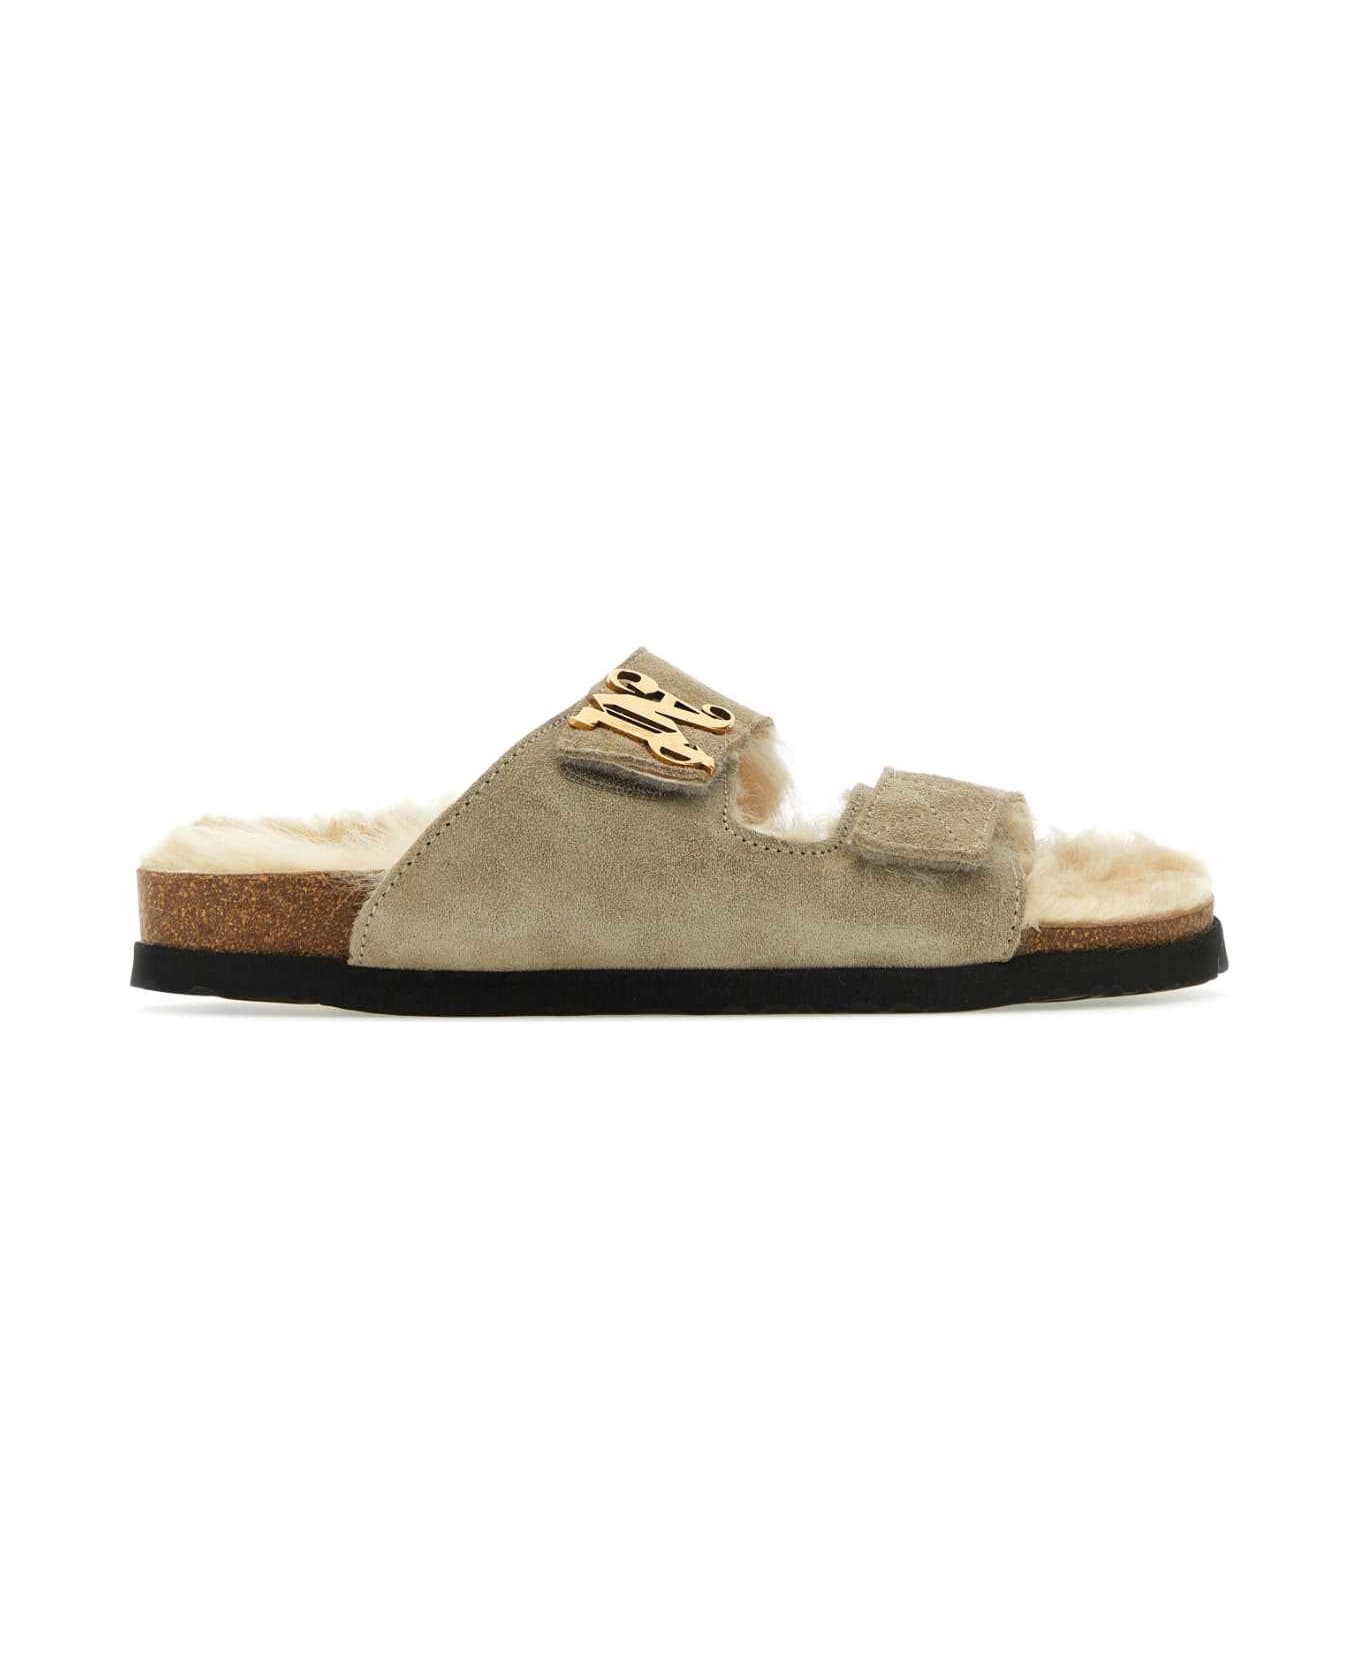 Palm Angels Sand Suede Slippers - CREAMBEIG